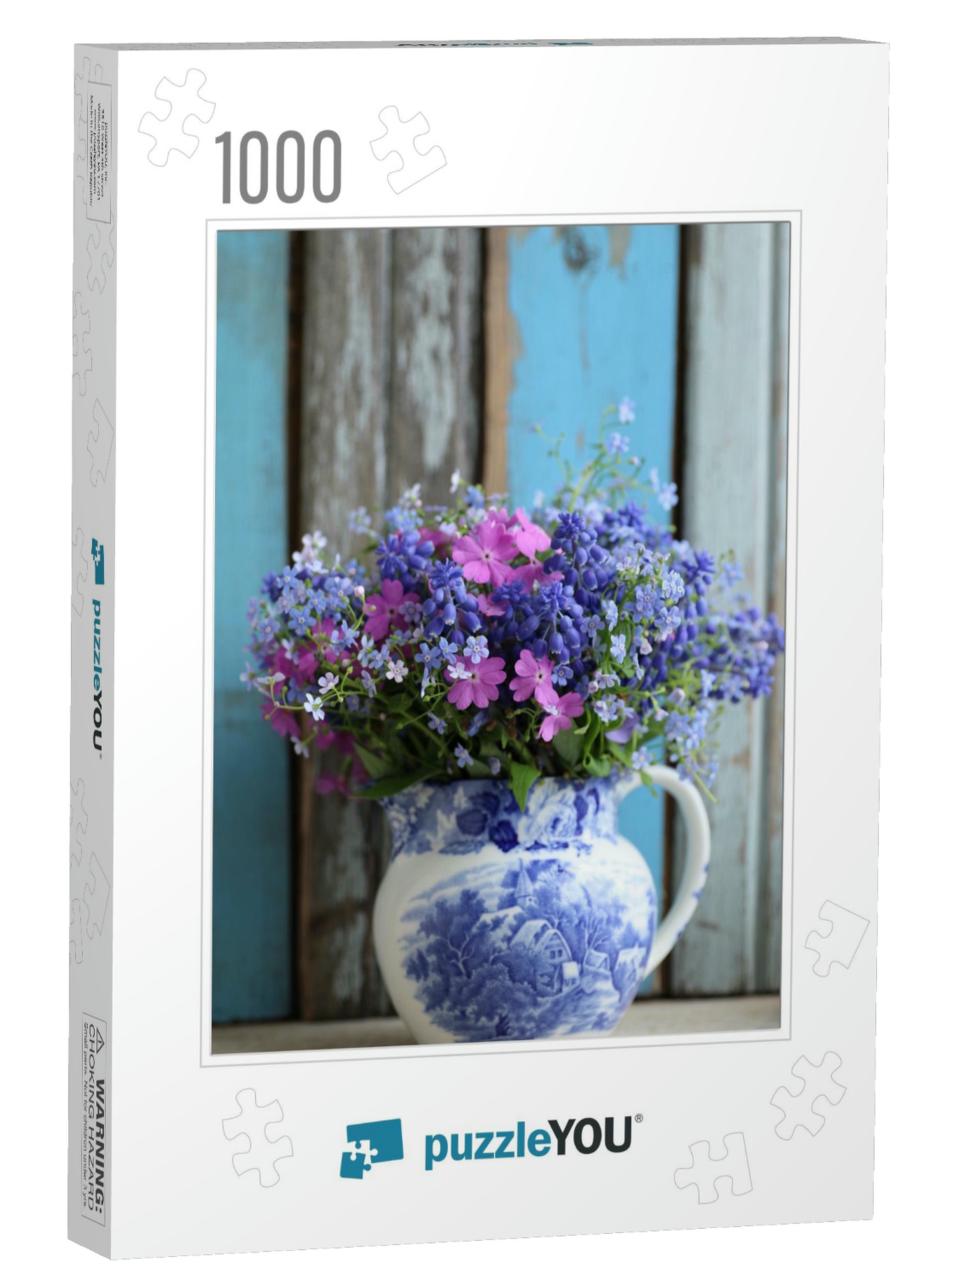 Blue & Pink Bouquet, Bunch Flowers in Vintage China Cream... Jigsaw Puzzle with 1000 pieces